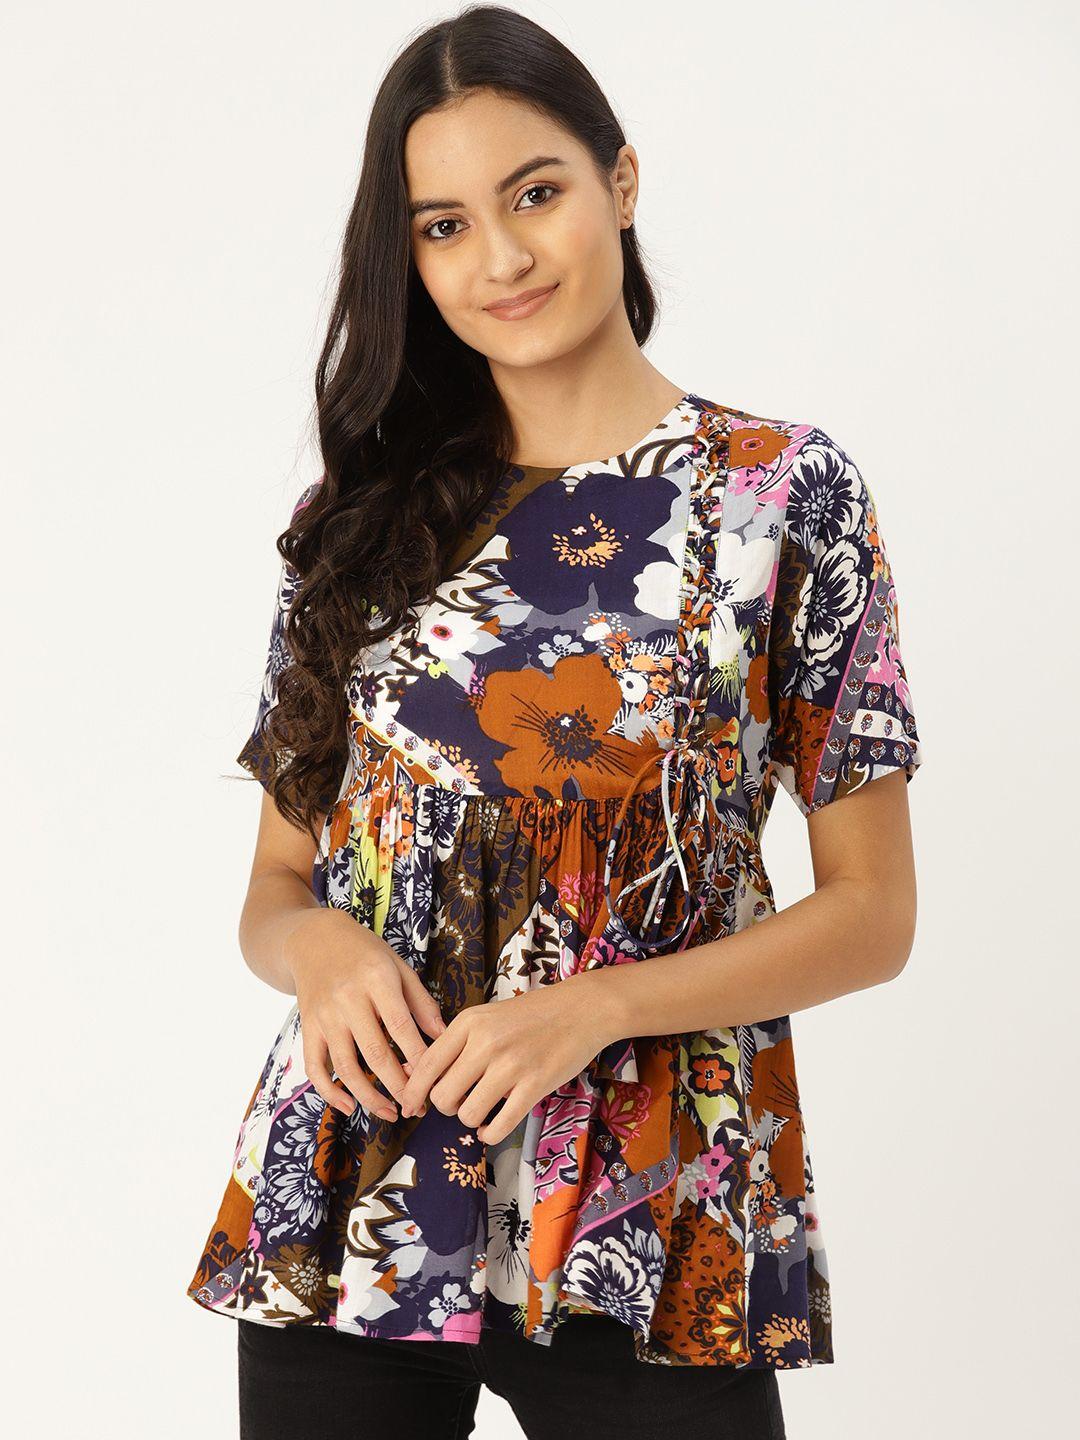 mbe-women-navy-blue-floral-printed-empire-top